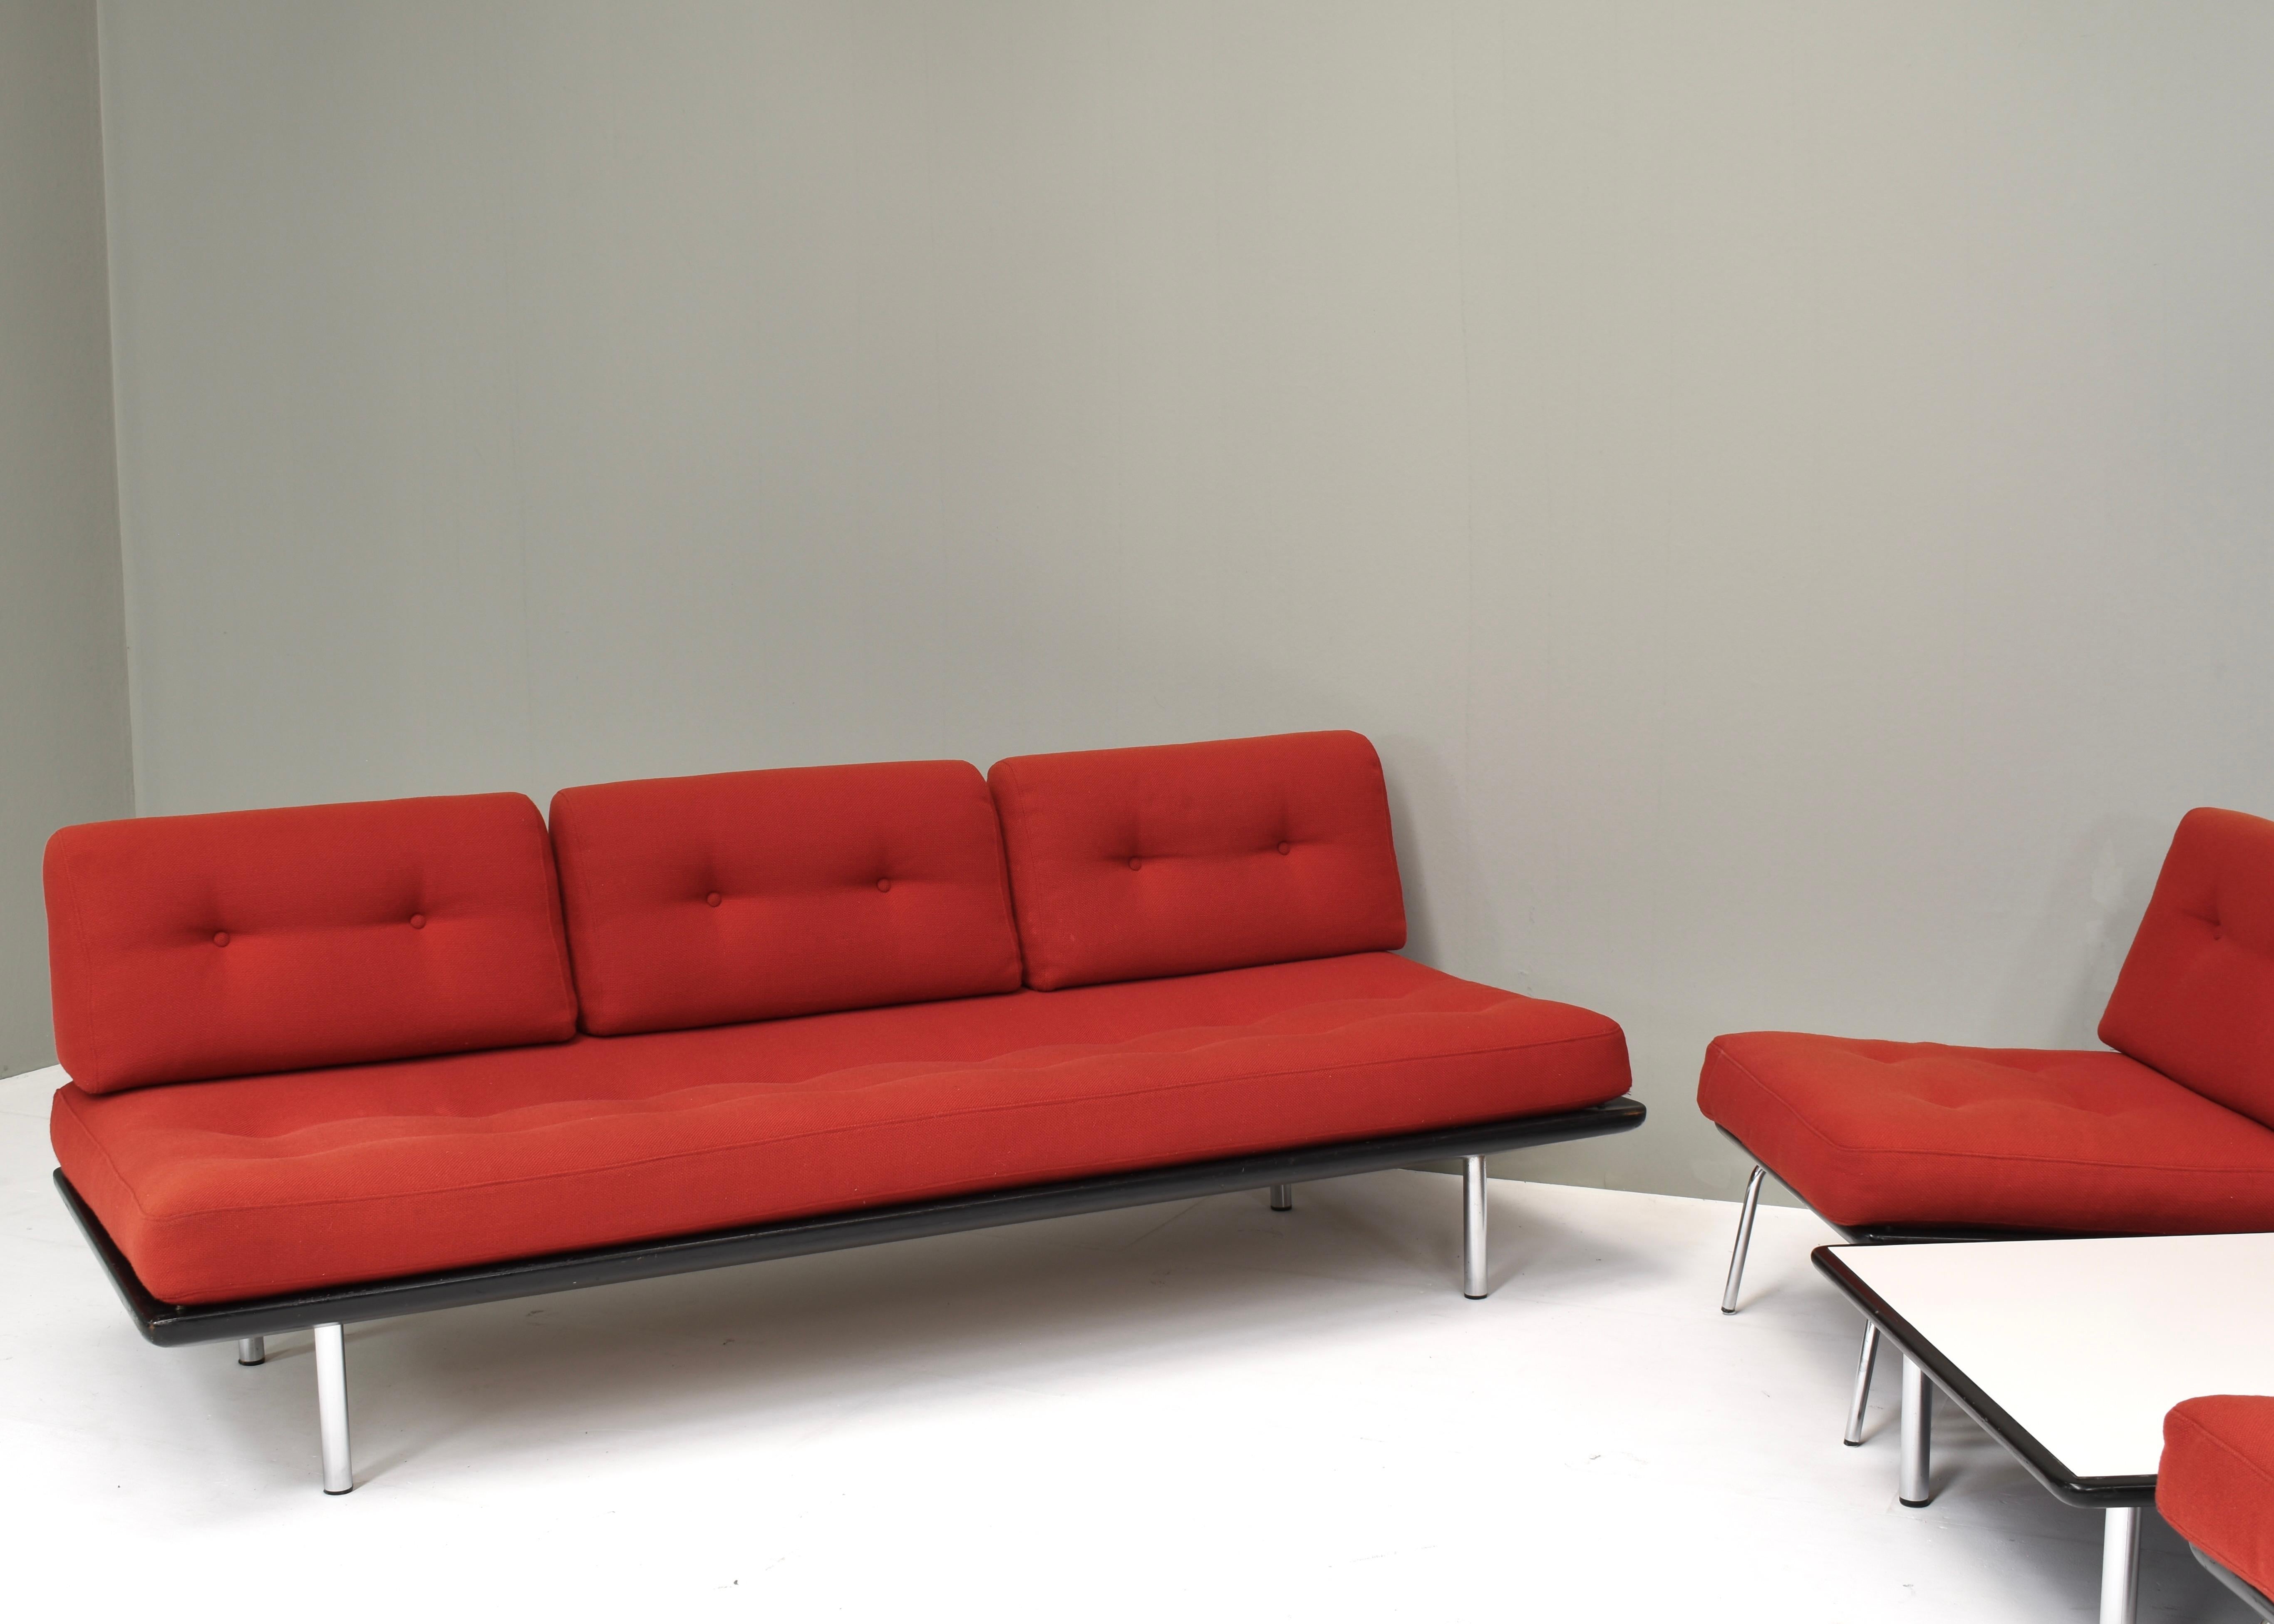 Dutch Seating Set by or in the Style of Martin Visser or Who Liang Ie – 1960s